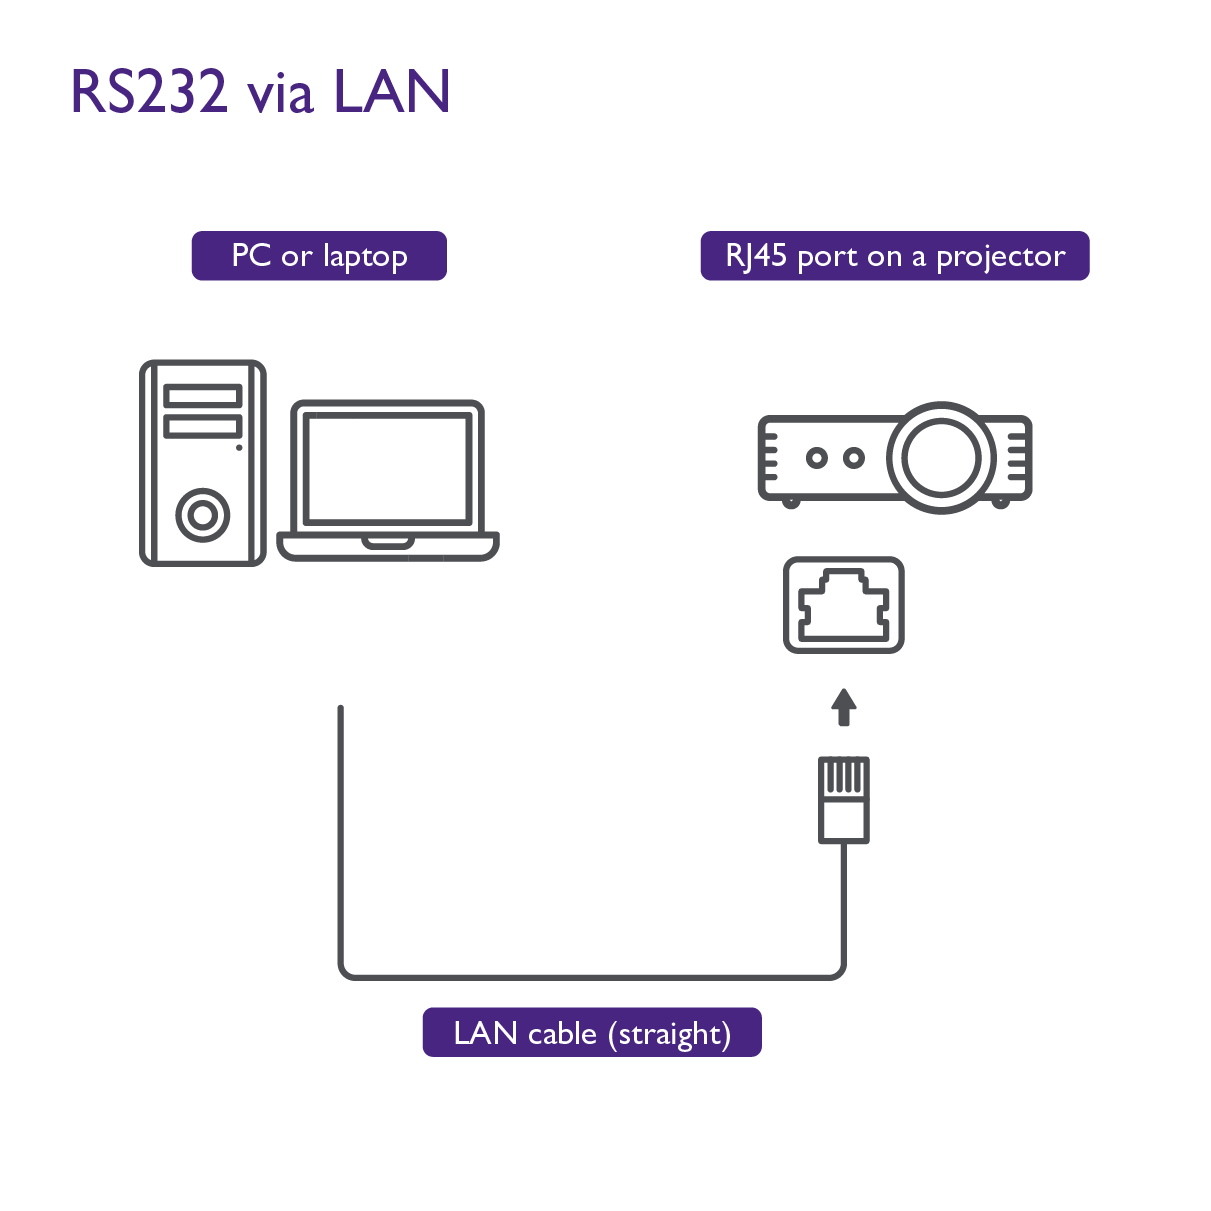 The average company uses LAN to setup its network so that the users in its network can communicate electronically and transfer documents.